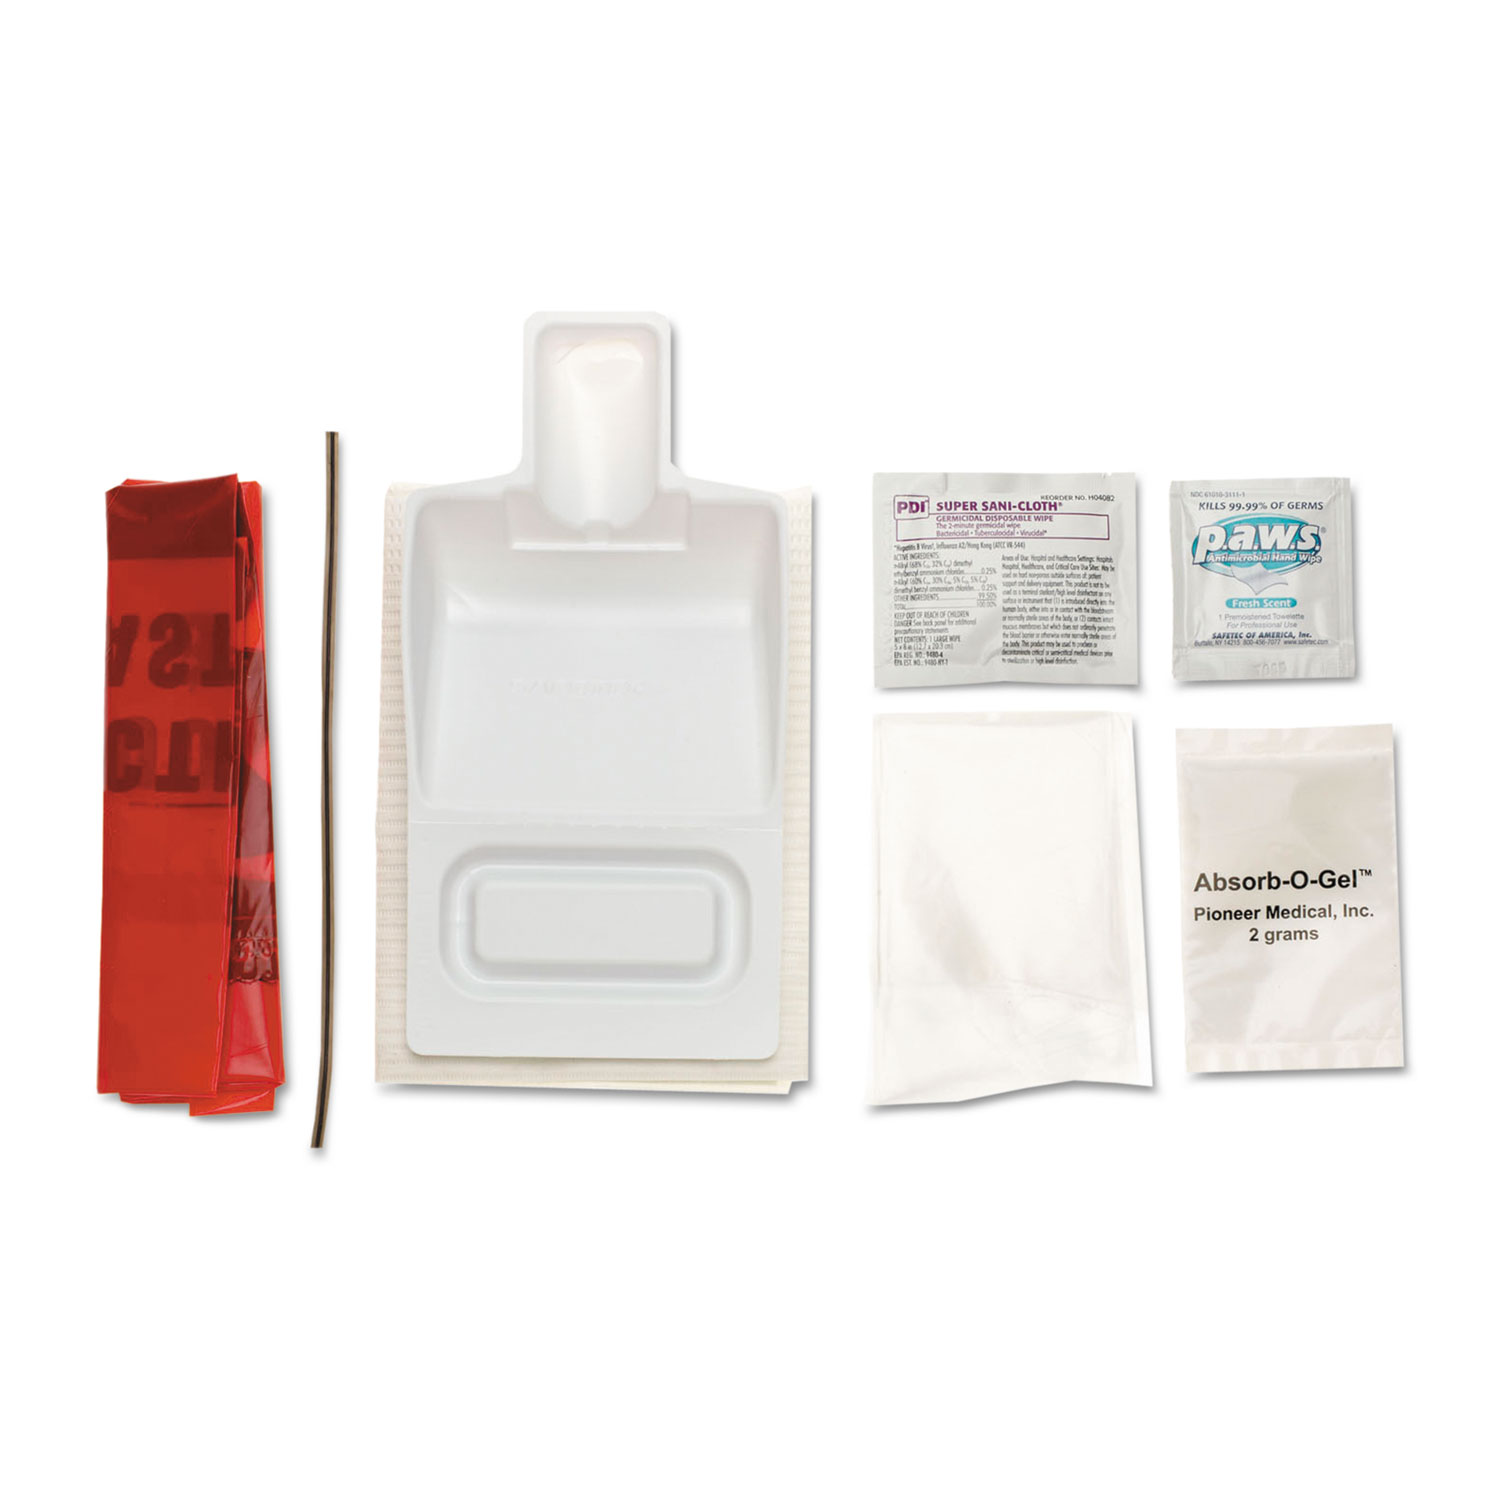  Medline MPH17CE210 Biohazard Fluid Clean-Up Kit, 7 Pieces, Synthetic-Fabric Bag (MIIMPH17CE210) 